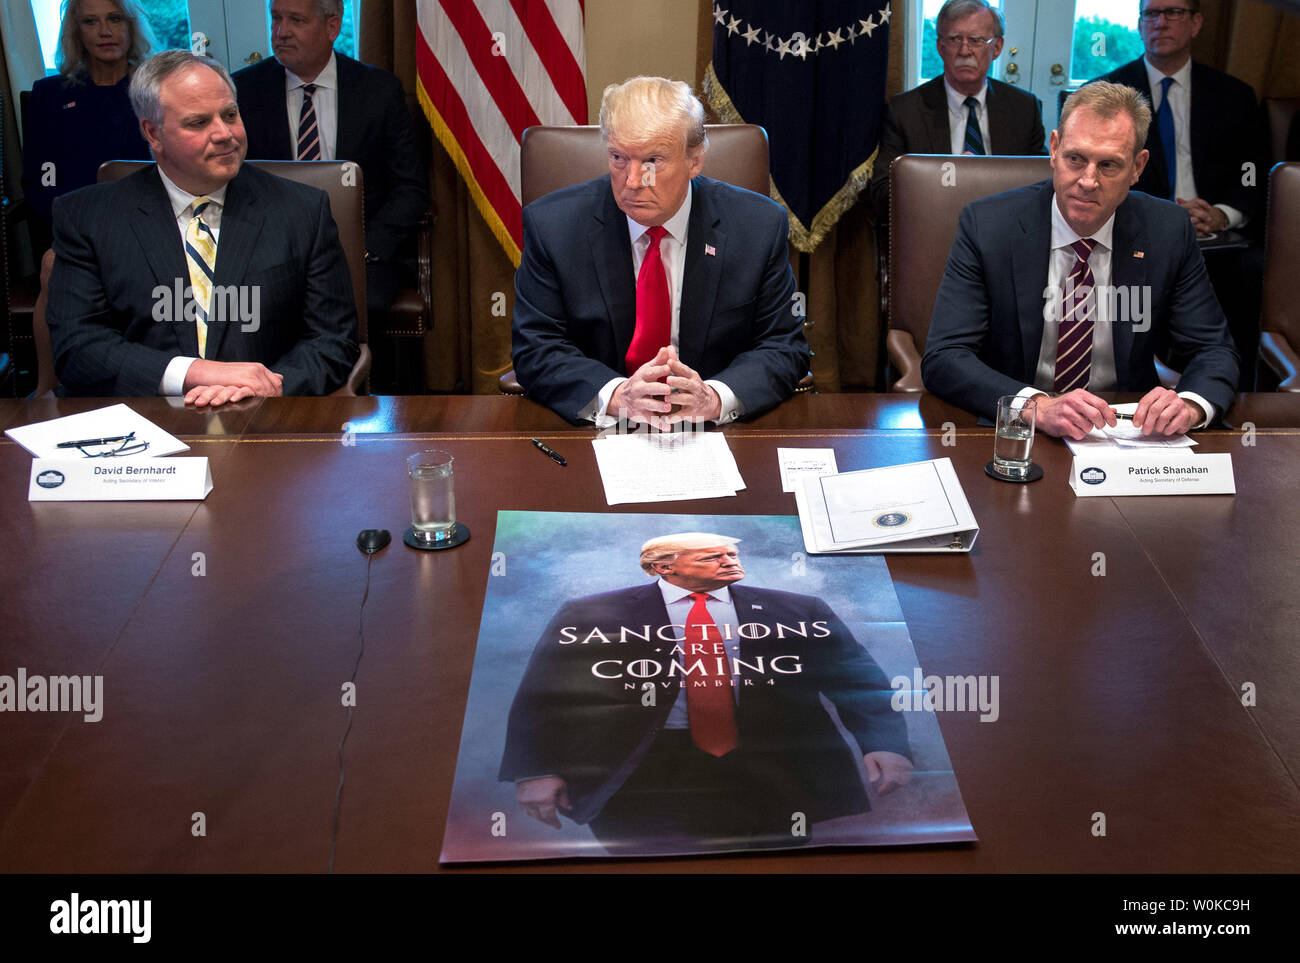 President Donald Trump speaks to the media during a cabinet meeting as a poster on sanctions is seen on the table, at the White House in Washington, D.C. on January 2, 2019. Trump said he will keep the government closed for as long as possible until he gets funding for her southern border wall. Photo by Kevin Dietsch/UPI Stock Photo